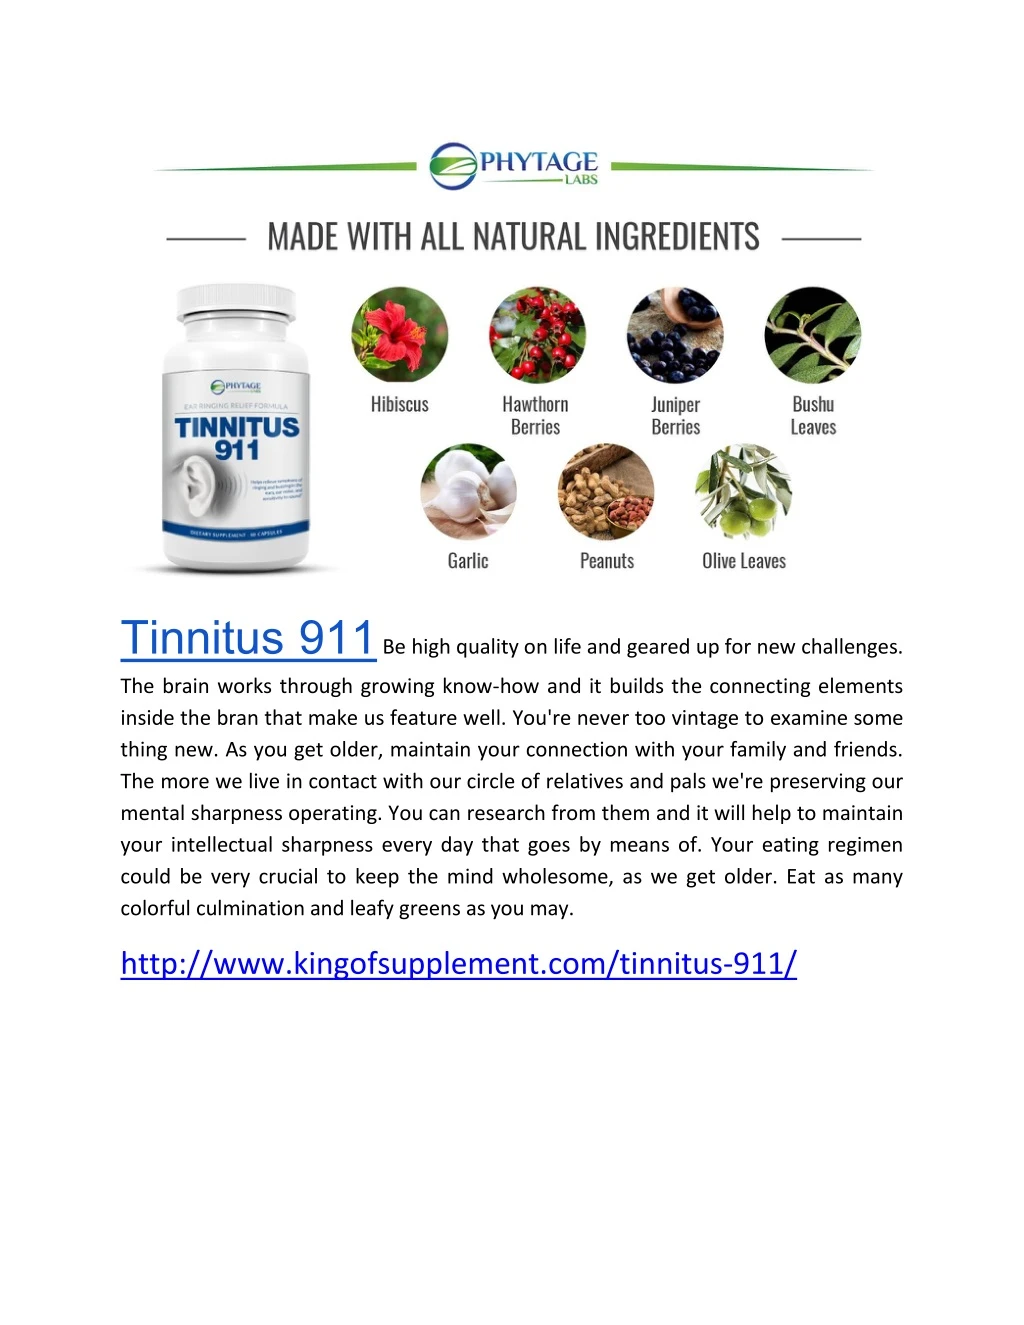 tinnitus 911 be high quality on life and geared